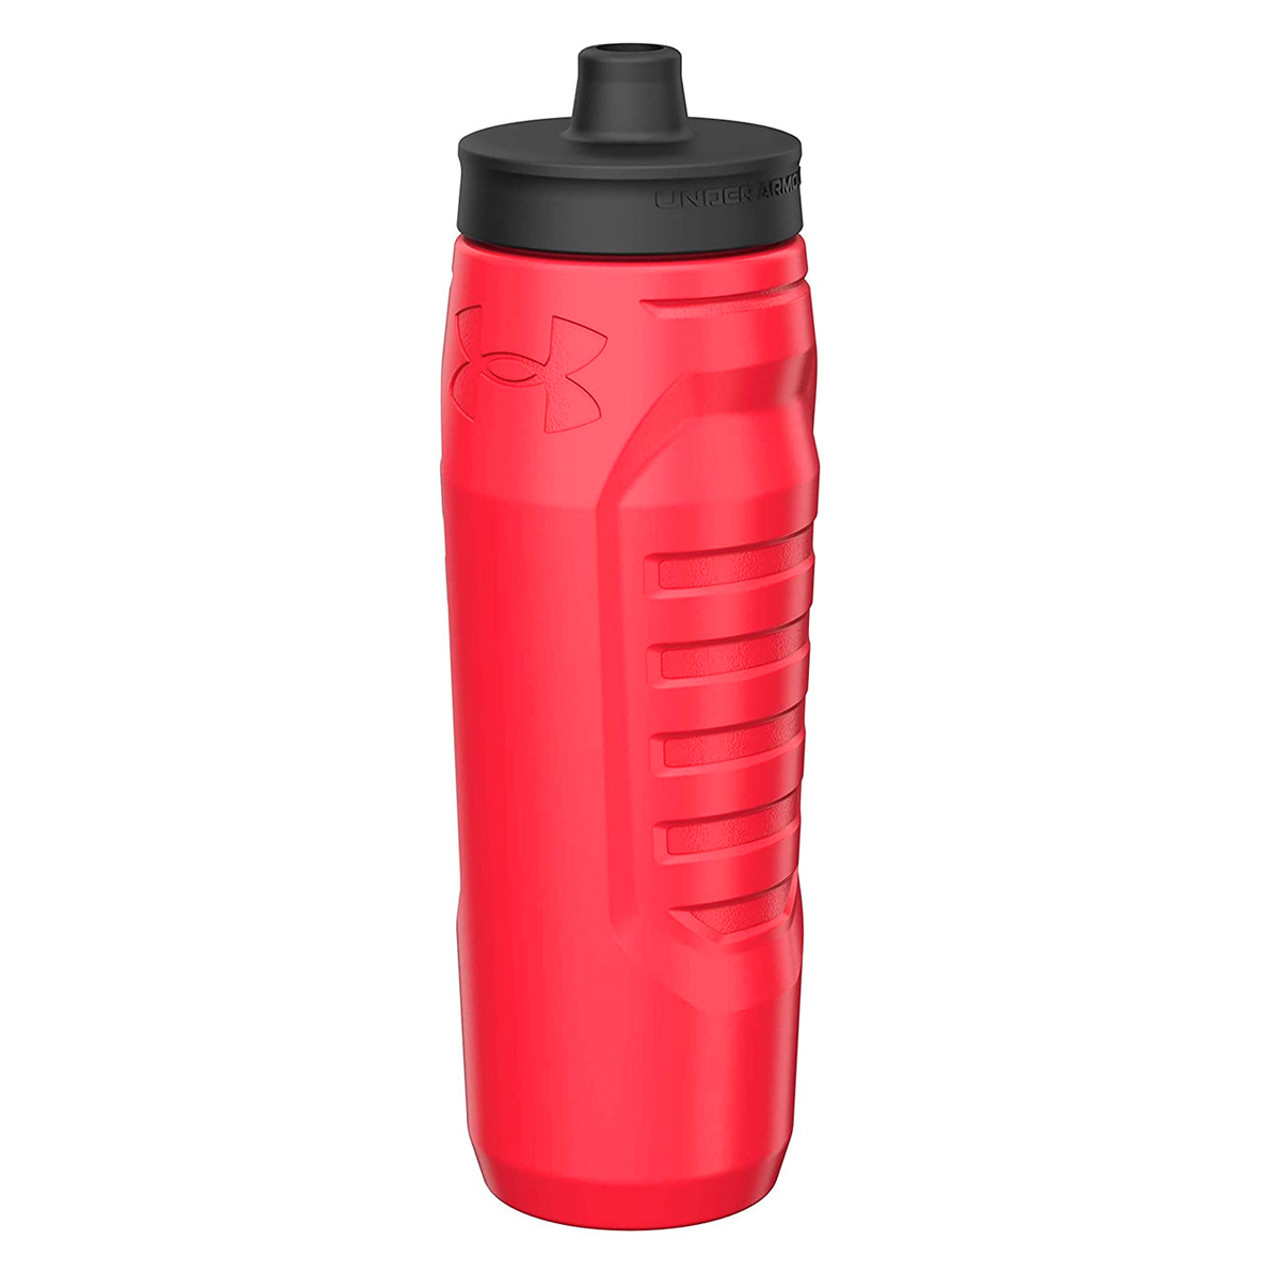 Under Armour Sideline Squeeze Bottle - Royal, 32 oz. - Runnings